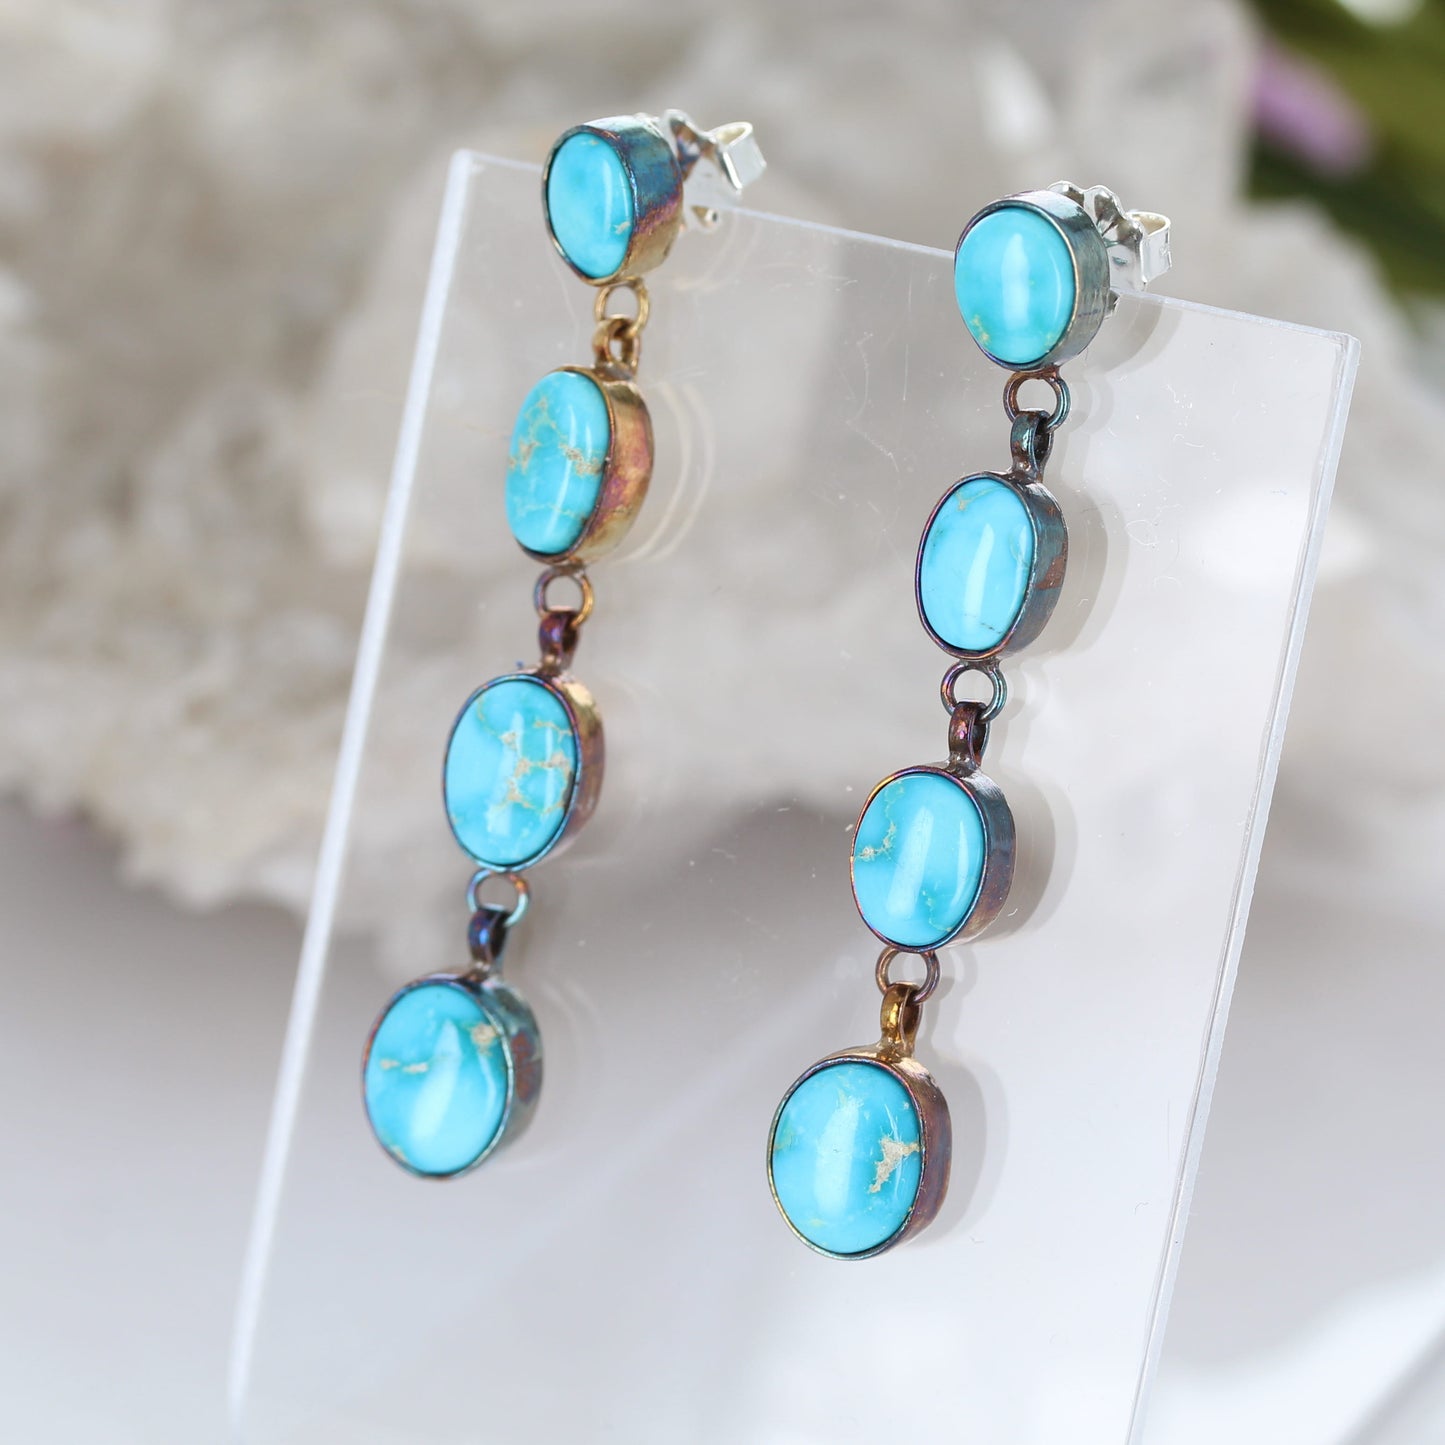 Blue Sonoran Turquoise Earrings Sterling Rainbow Oxidized 4 Stone Dangles